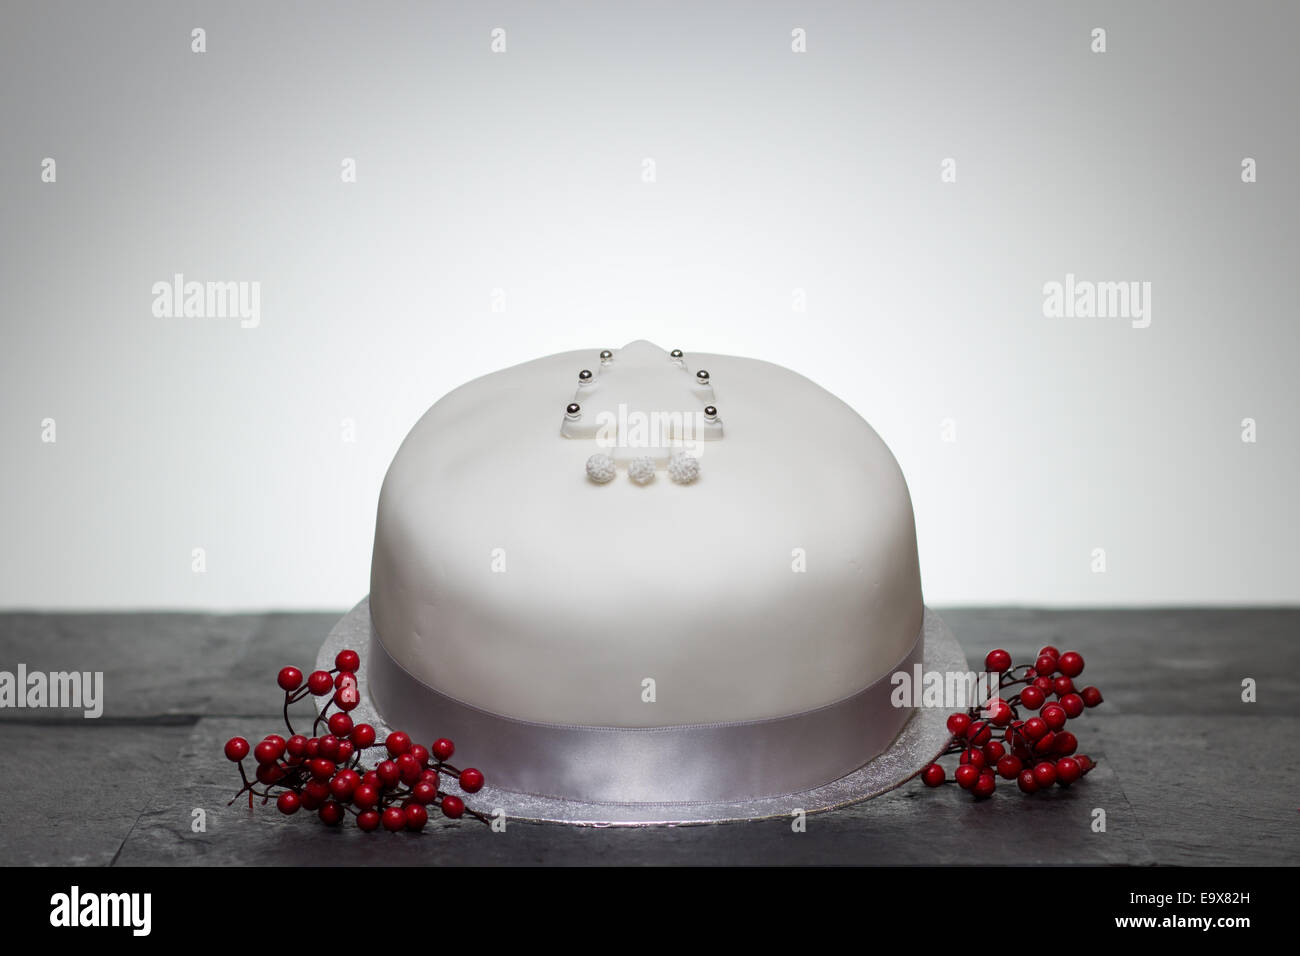 a Christmas cake presented with royal icing and a Christmas tree motif Stock Photo